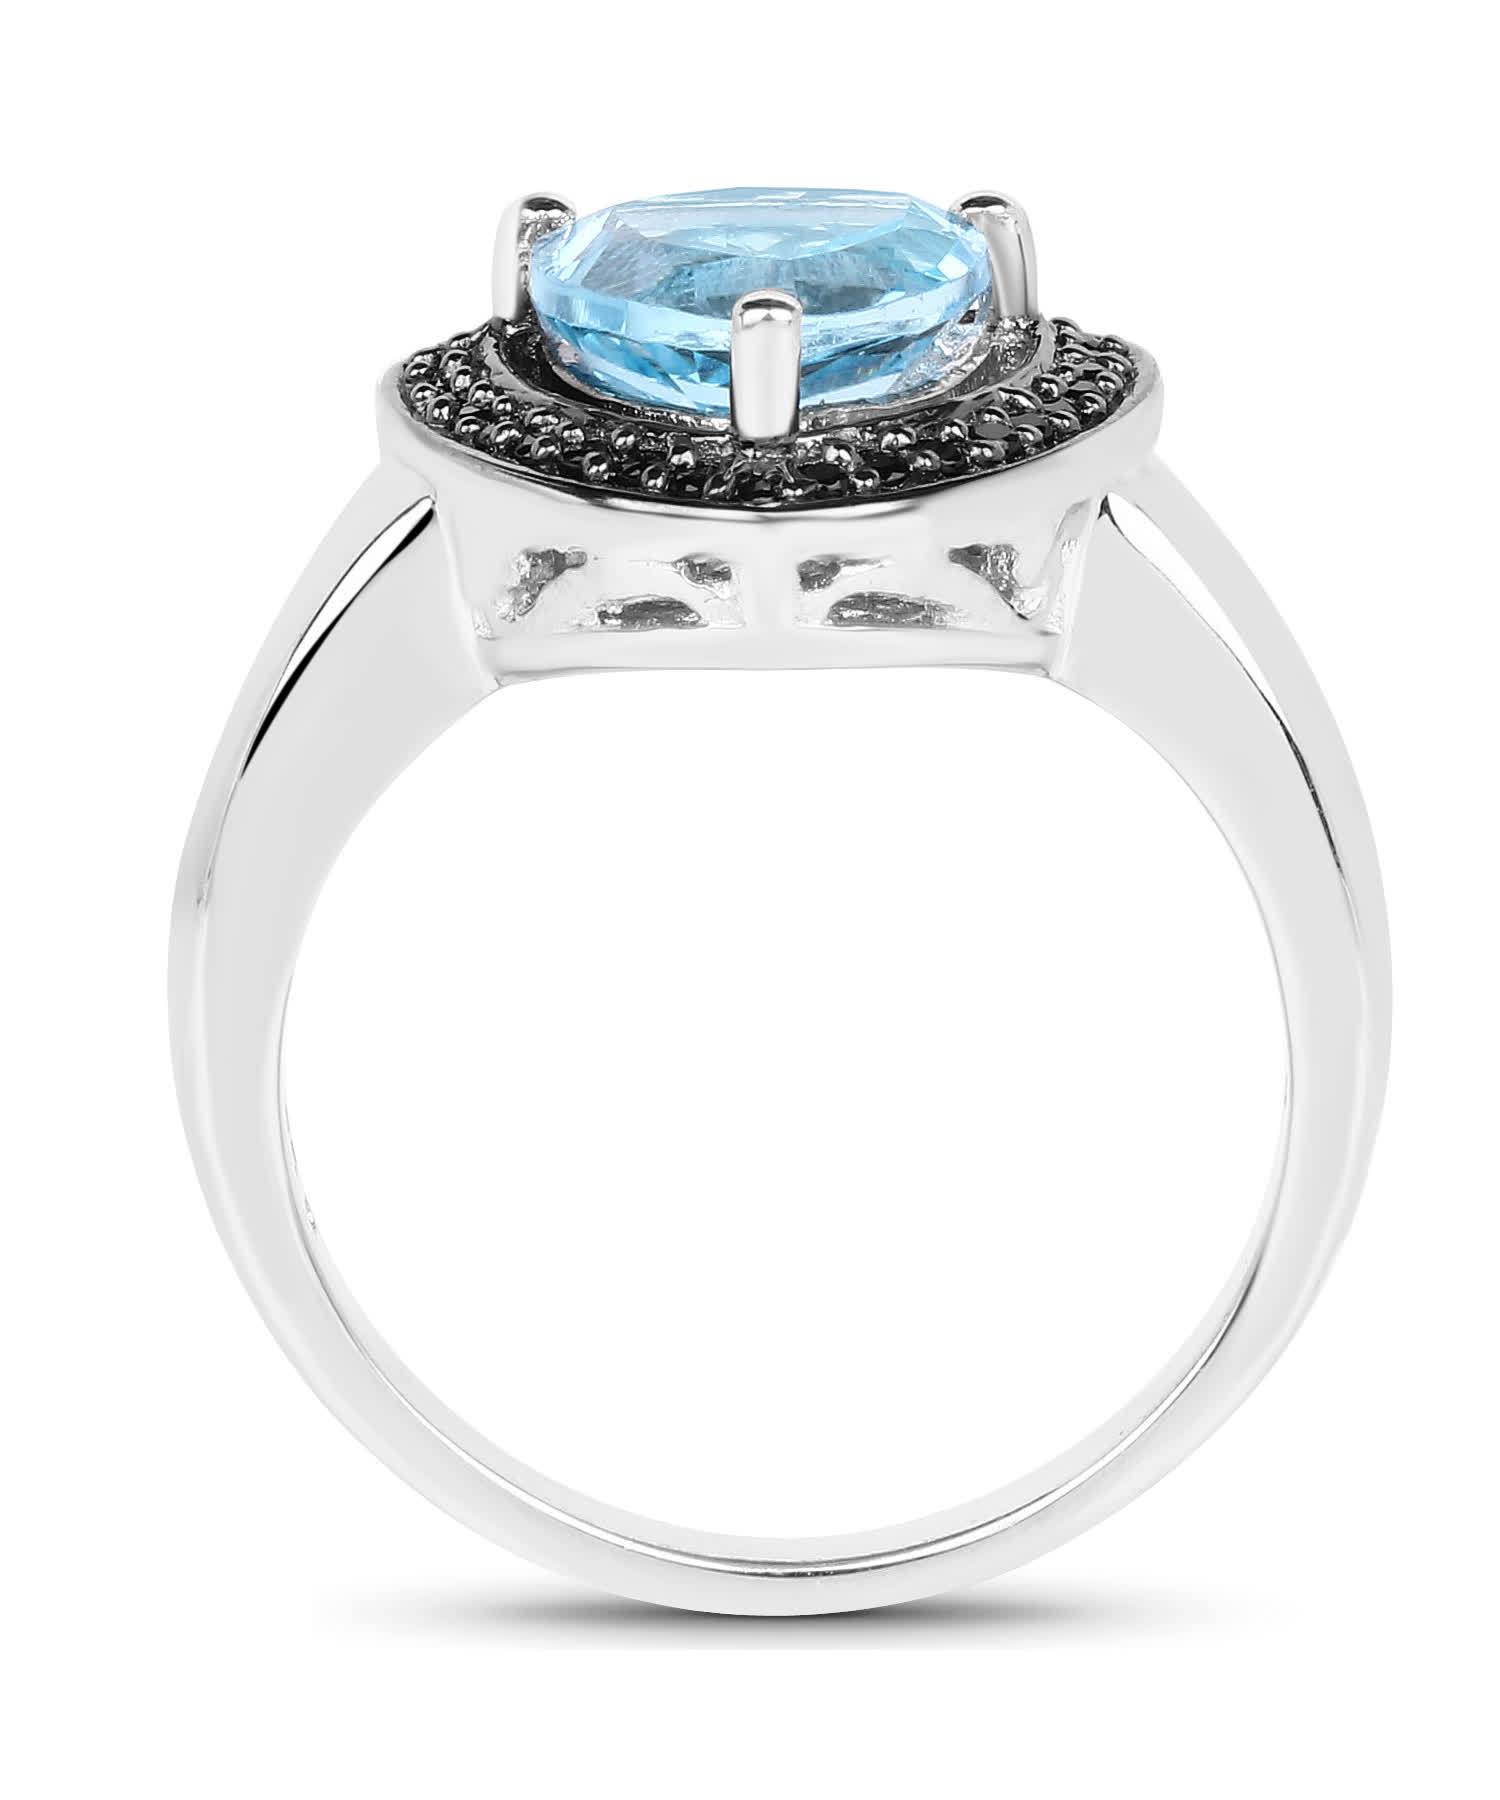 2.06ctw Natural Swiss Blue Topaz and Black Diamond Rhodium Plated 925 Sterling Silver Triangle Ring View 2